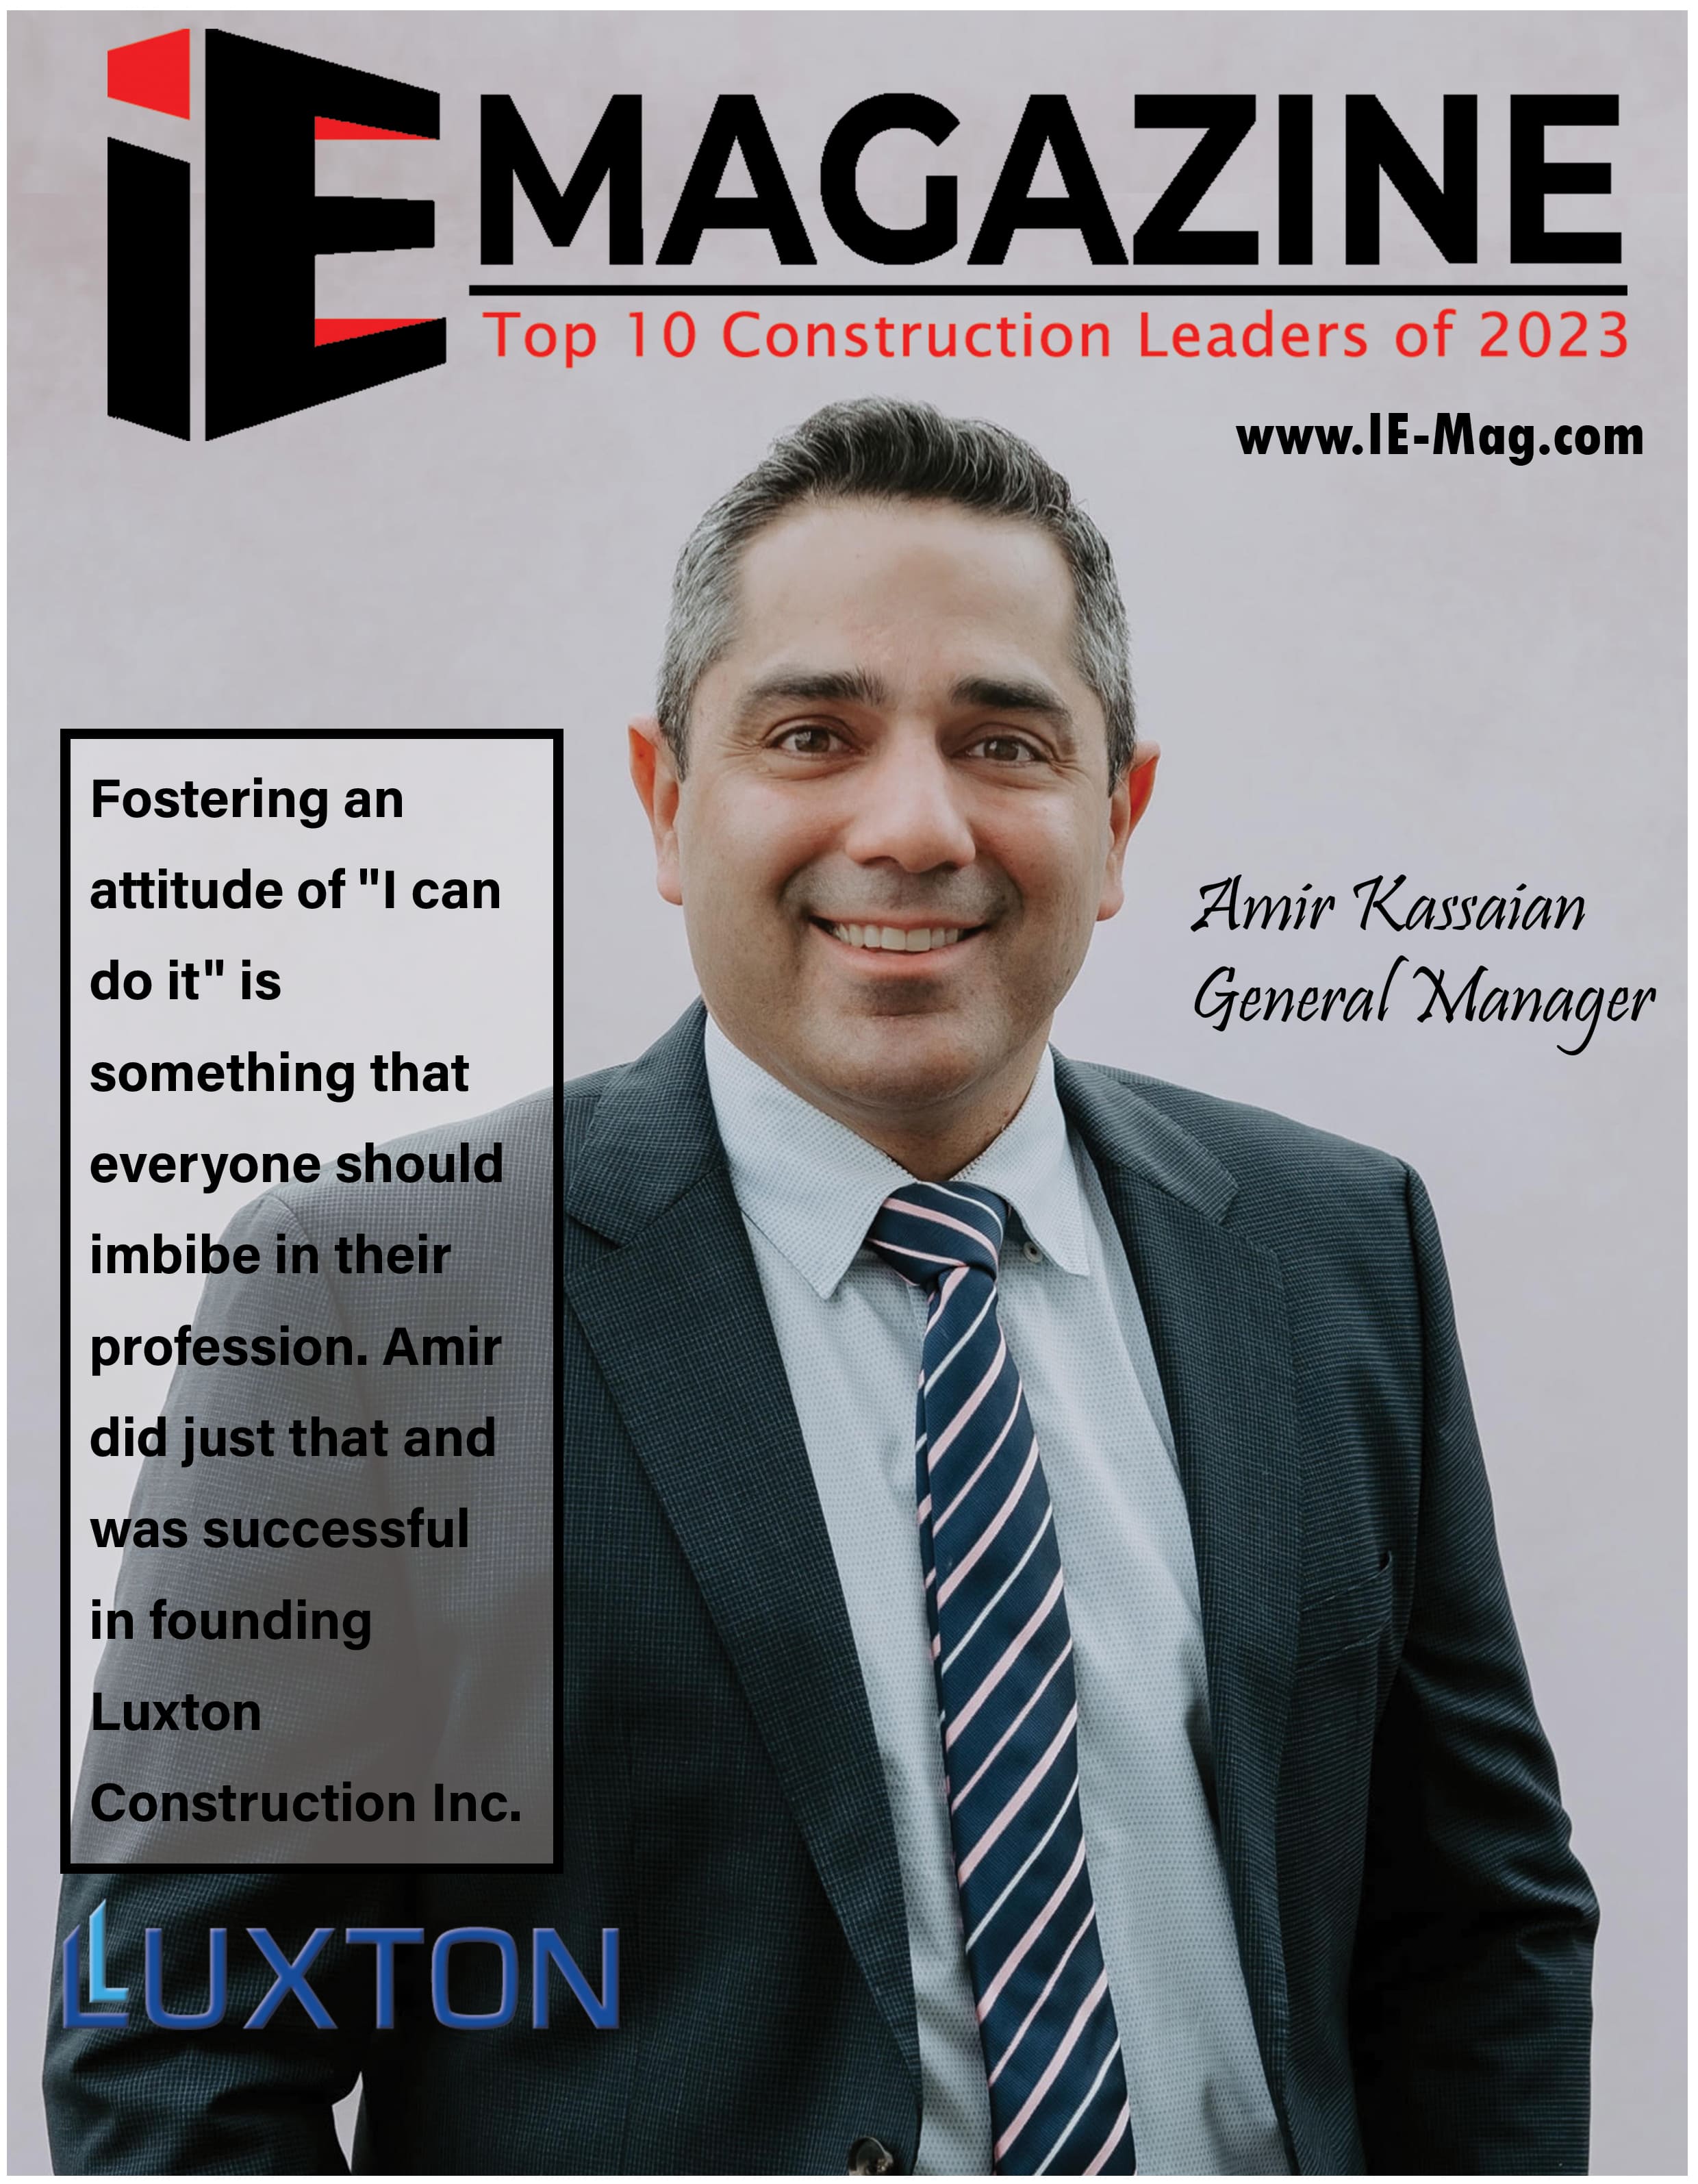 Top 10 Construction Leaders of 2023 Magazine